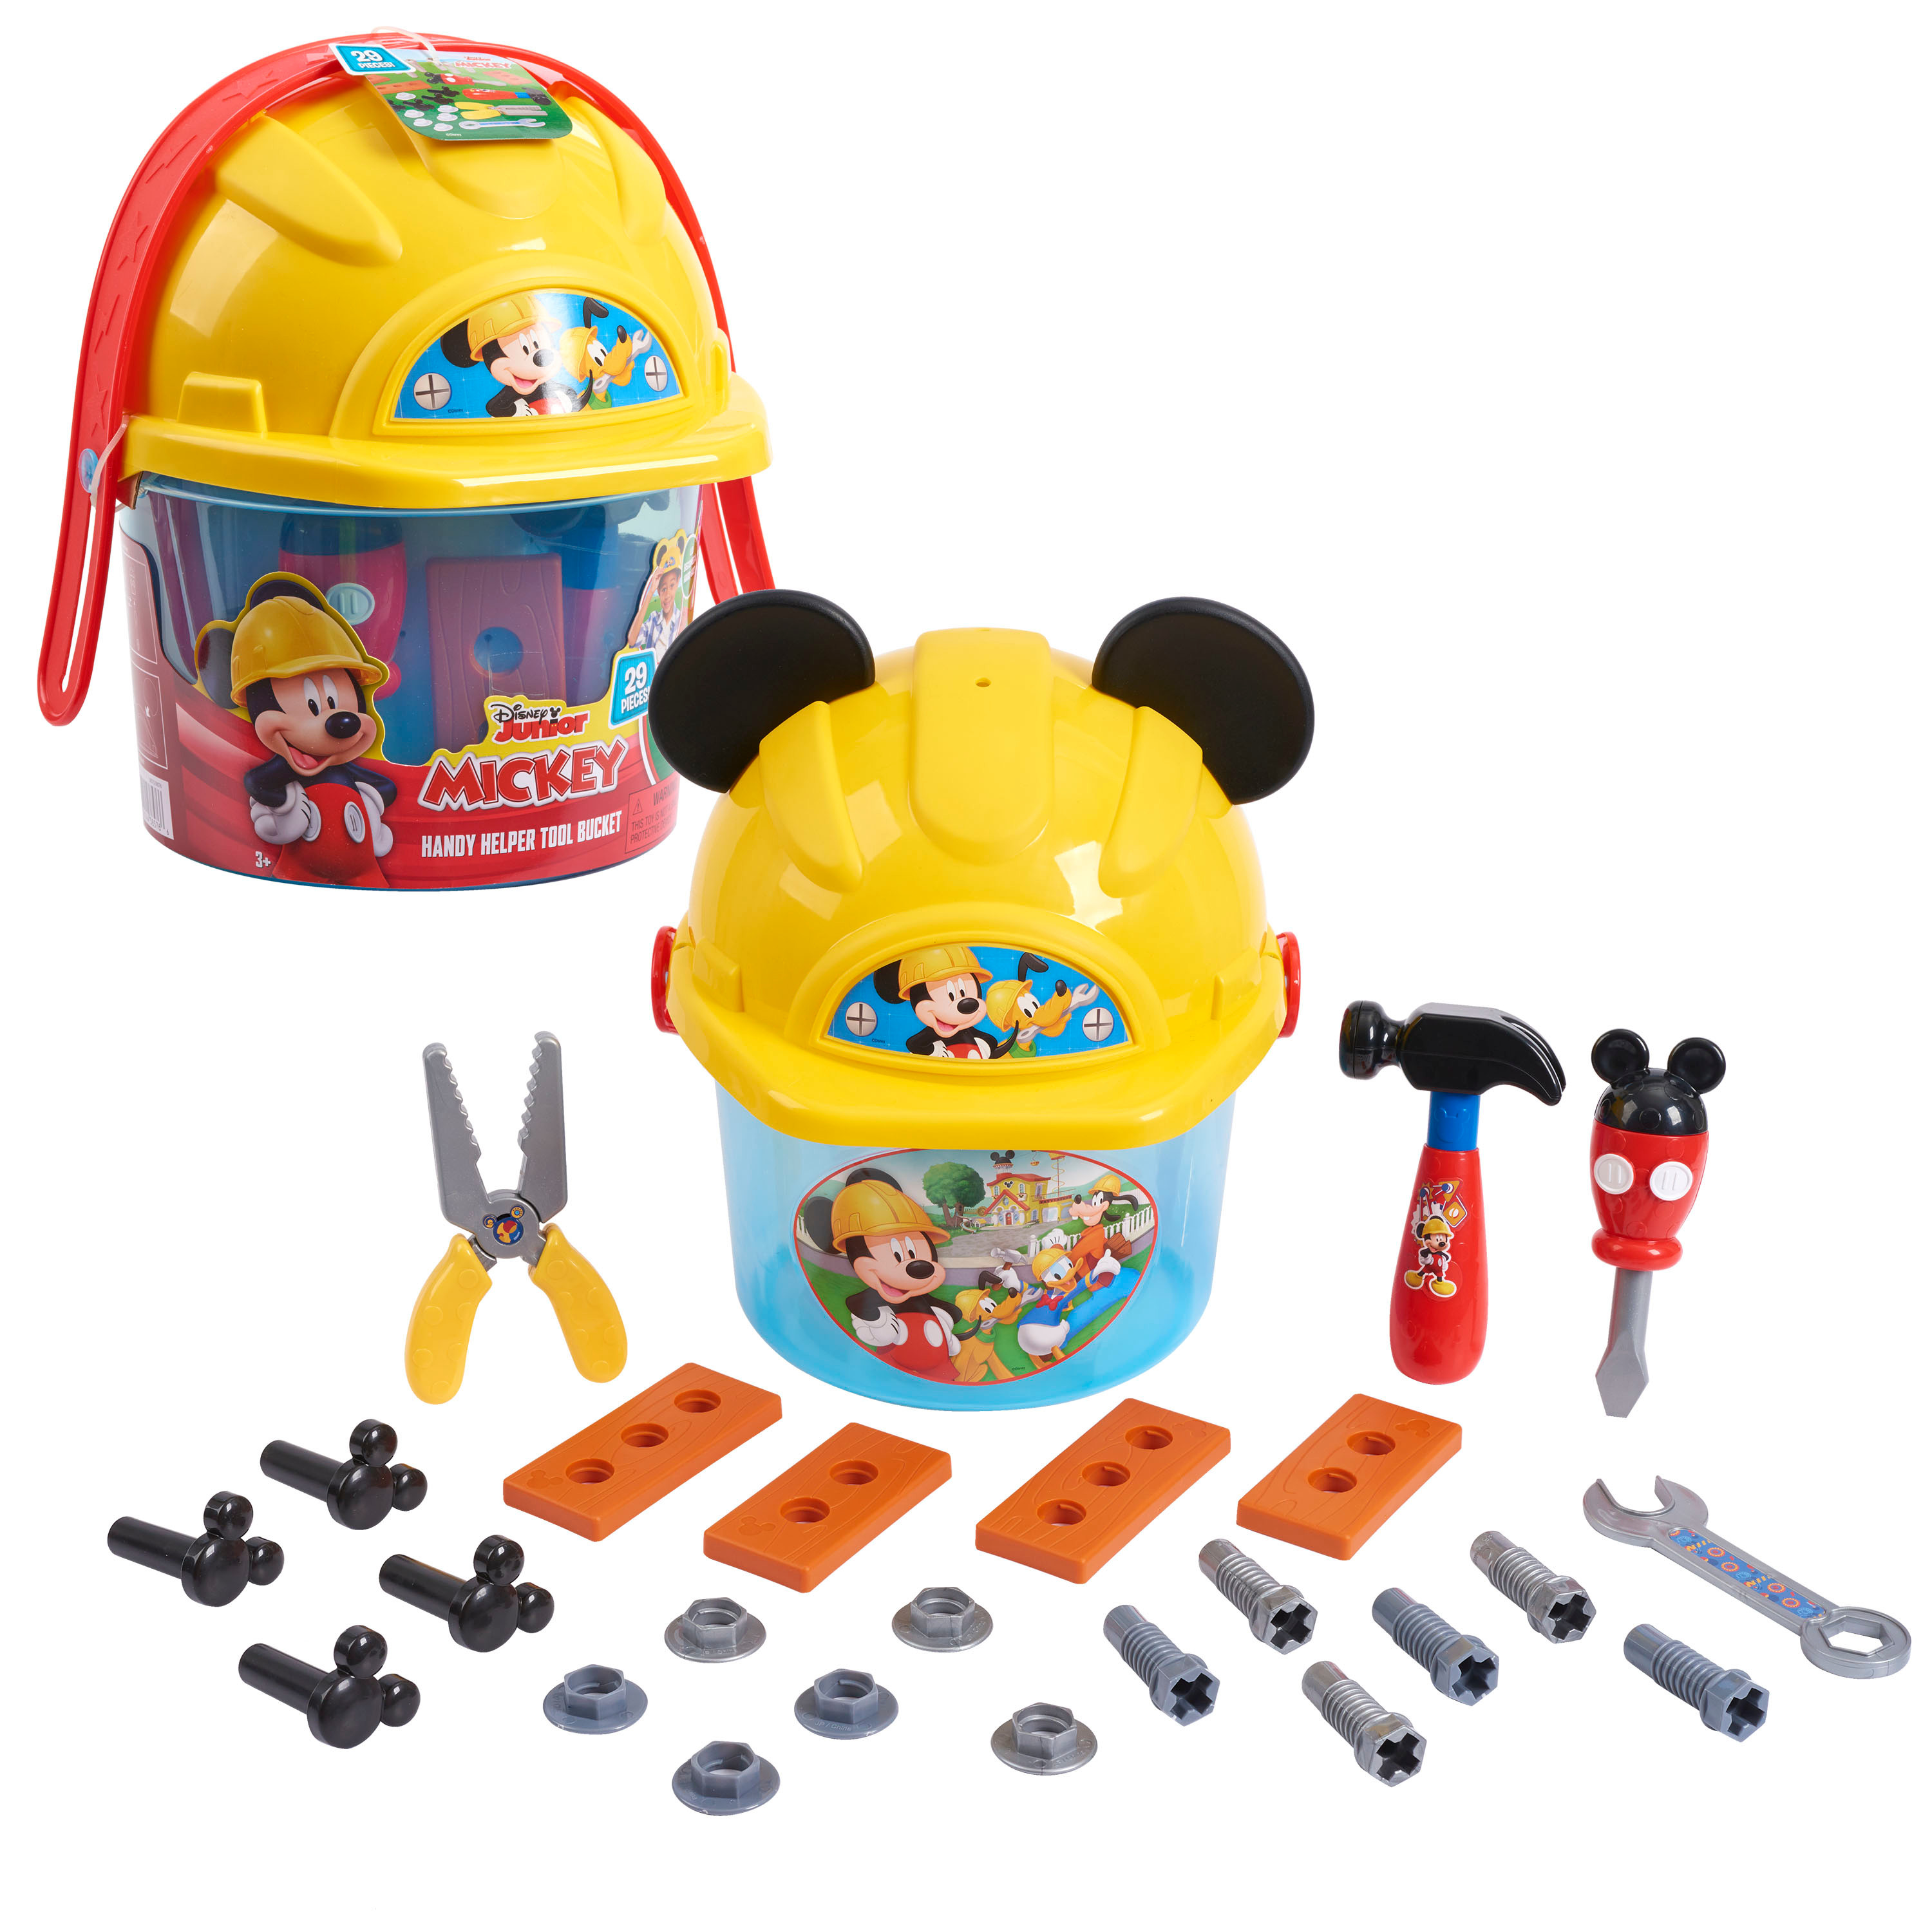 Just Play Disney Junior Mickey Mouse Handy Helper Tool Bucket, 25-pieces, Preschool Ages 3 up - image 1 of 8